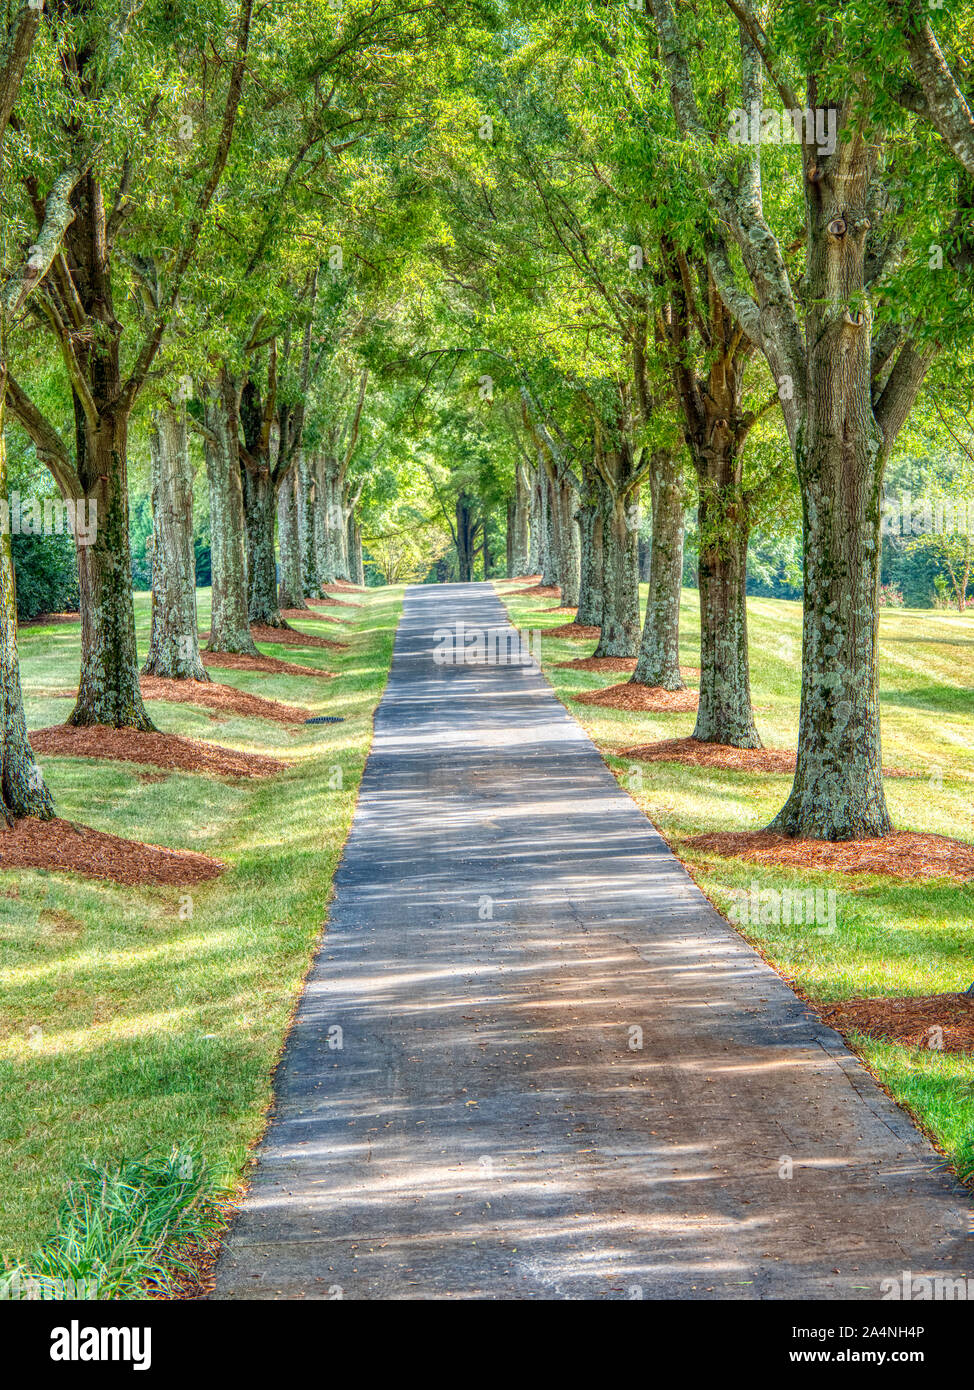 Long straight road lined with trees Stock Photo